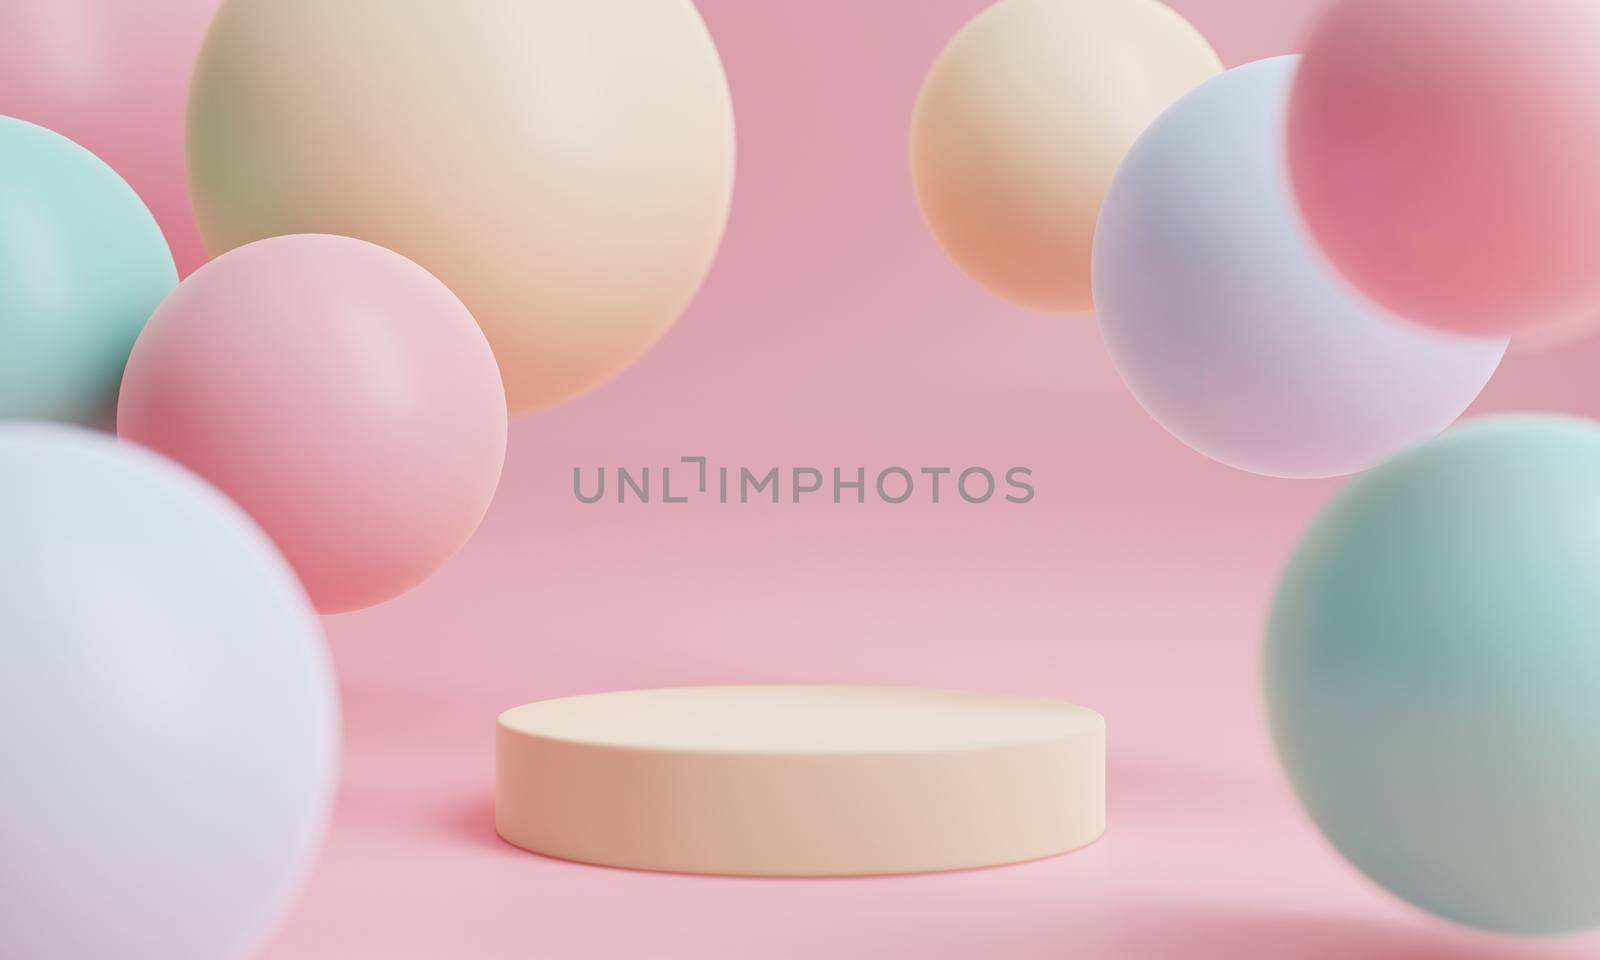 Minimal product podium stage with multicolor pastel color balloons in geometric shape for presentation background. Abstract background and decoration scene template. 3D illustration rendering